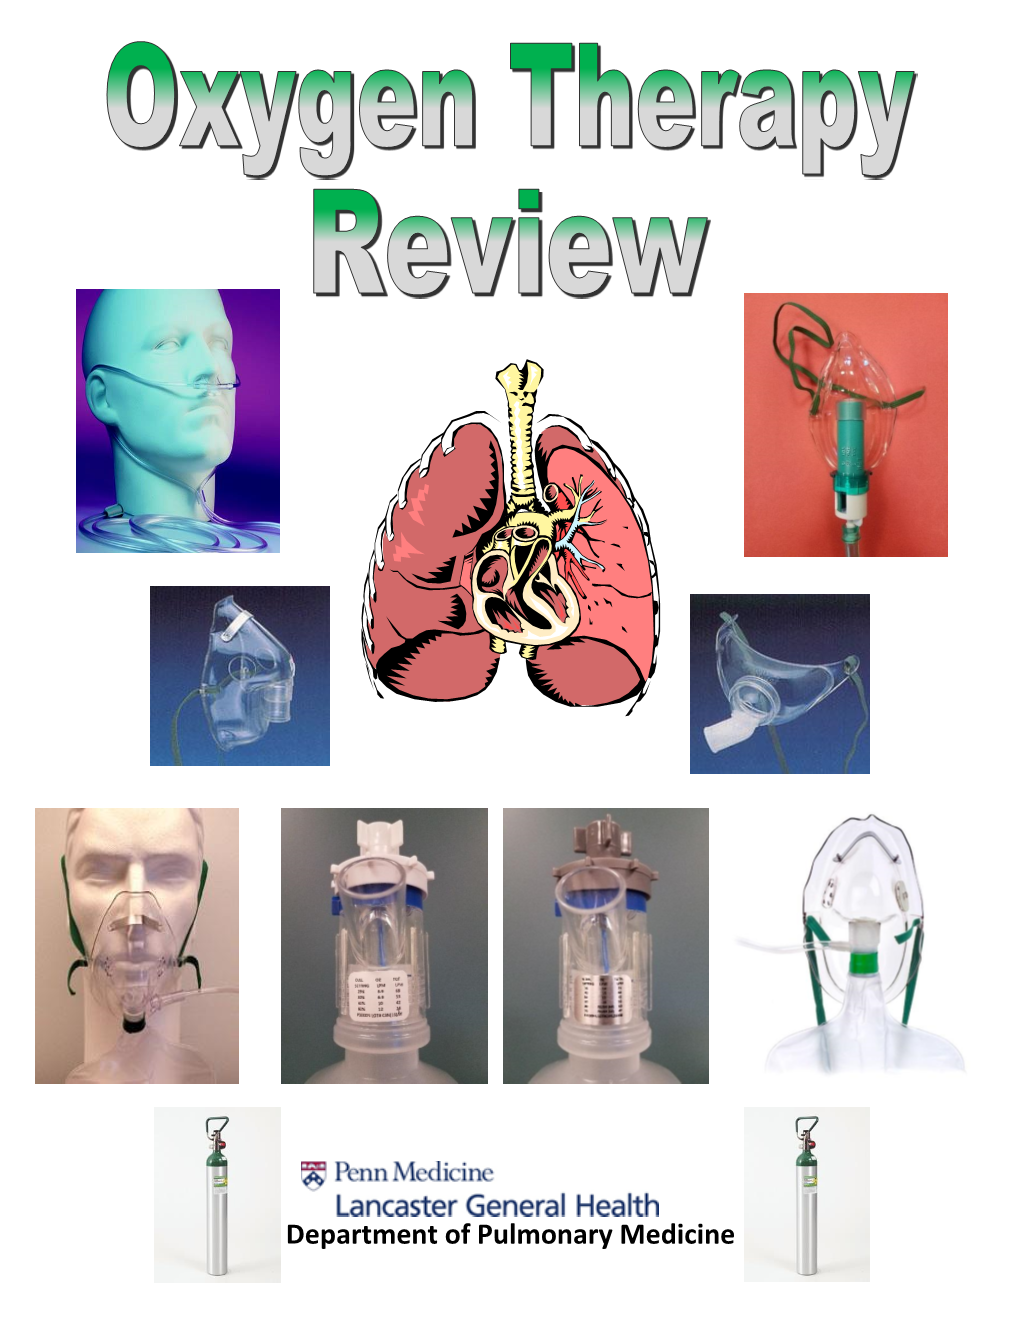 Oxygen Therapy Review Packet